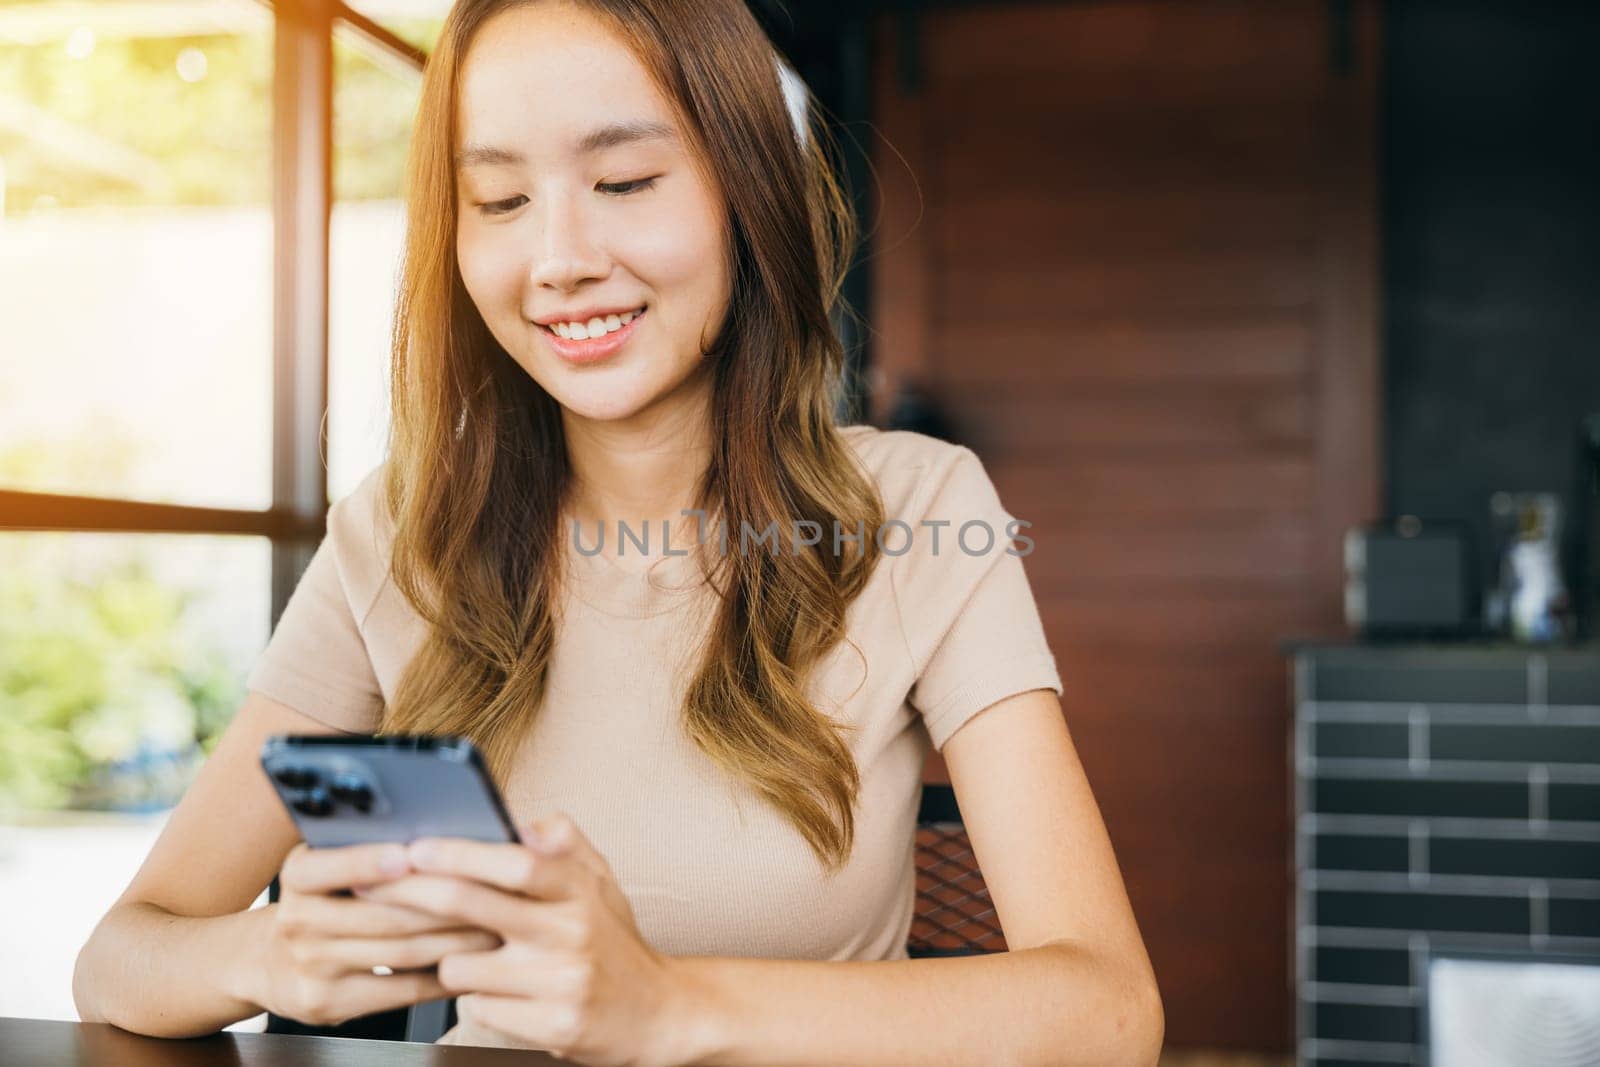 Beautiful Asian female has transfer money financial internet banking on mobile phone, young woman using smart phone for shopping online at cafe coffee shop near windows in the morning